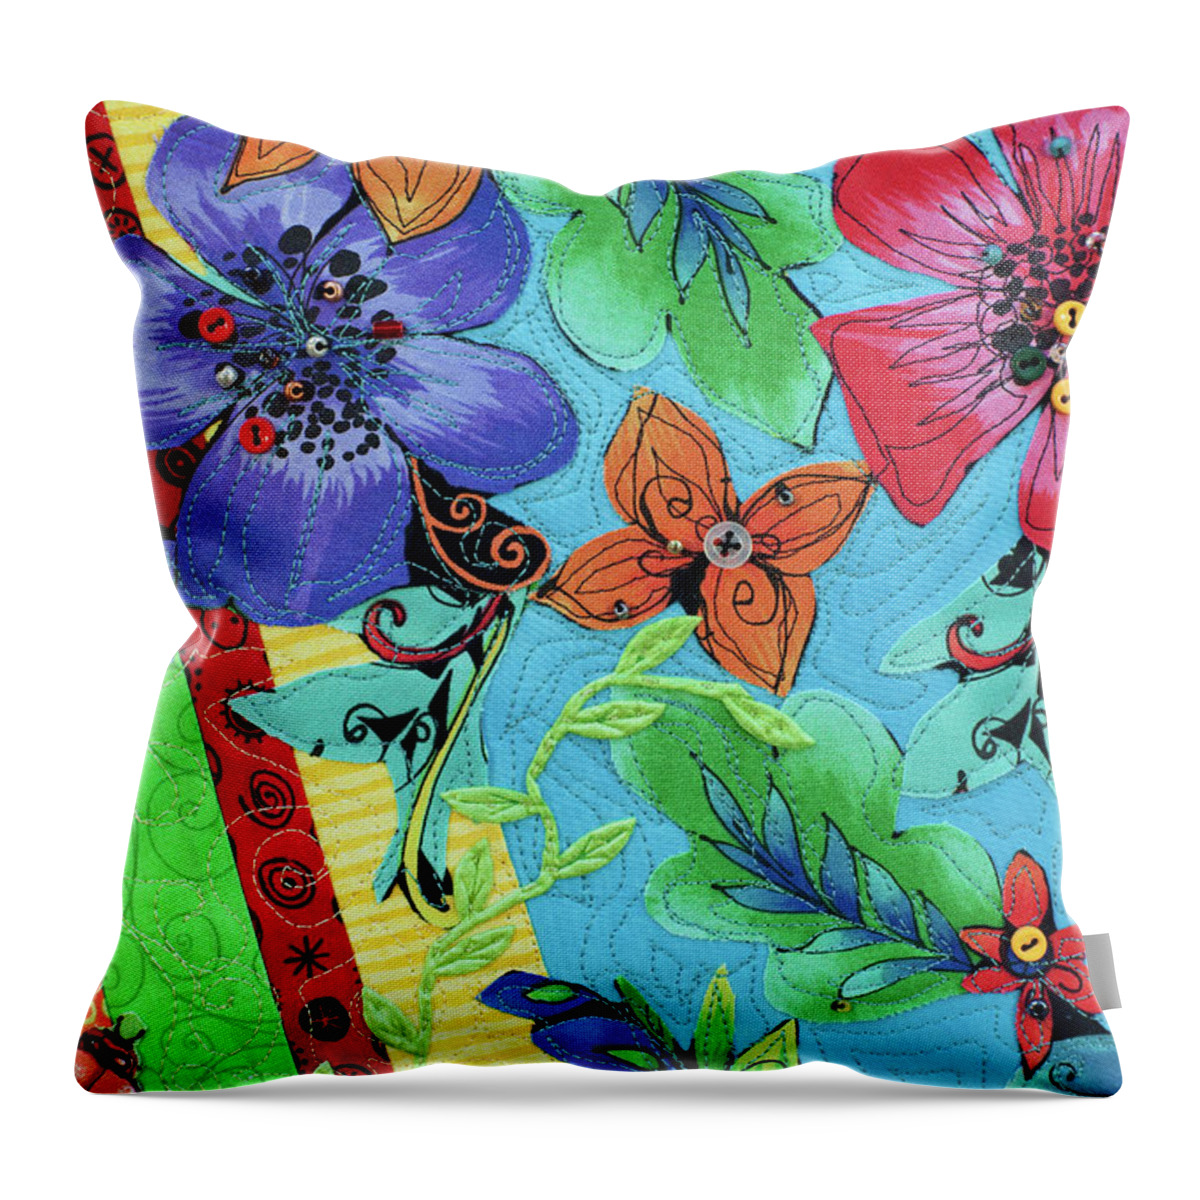 Tropical Breeze2 Throw Pillow featuring the mixed media Tropical Breeze 2 by Vivian Aumond